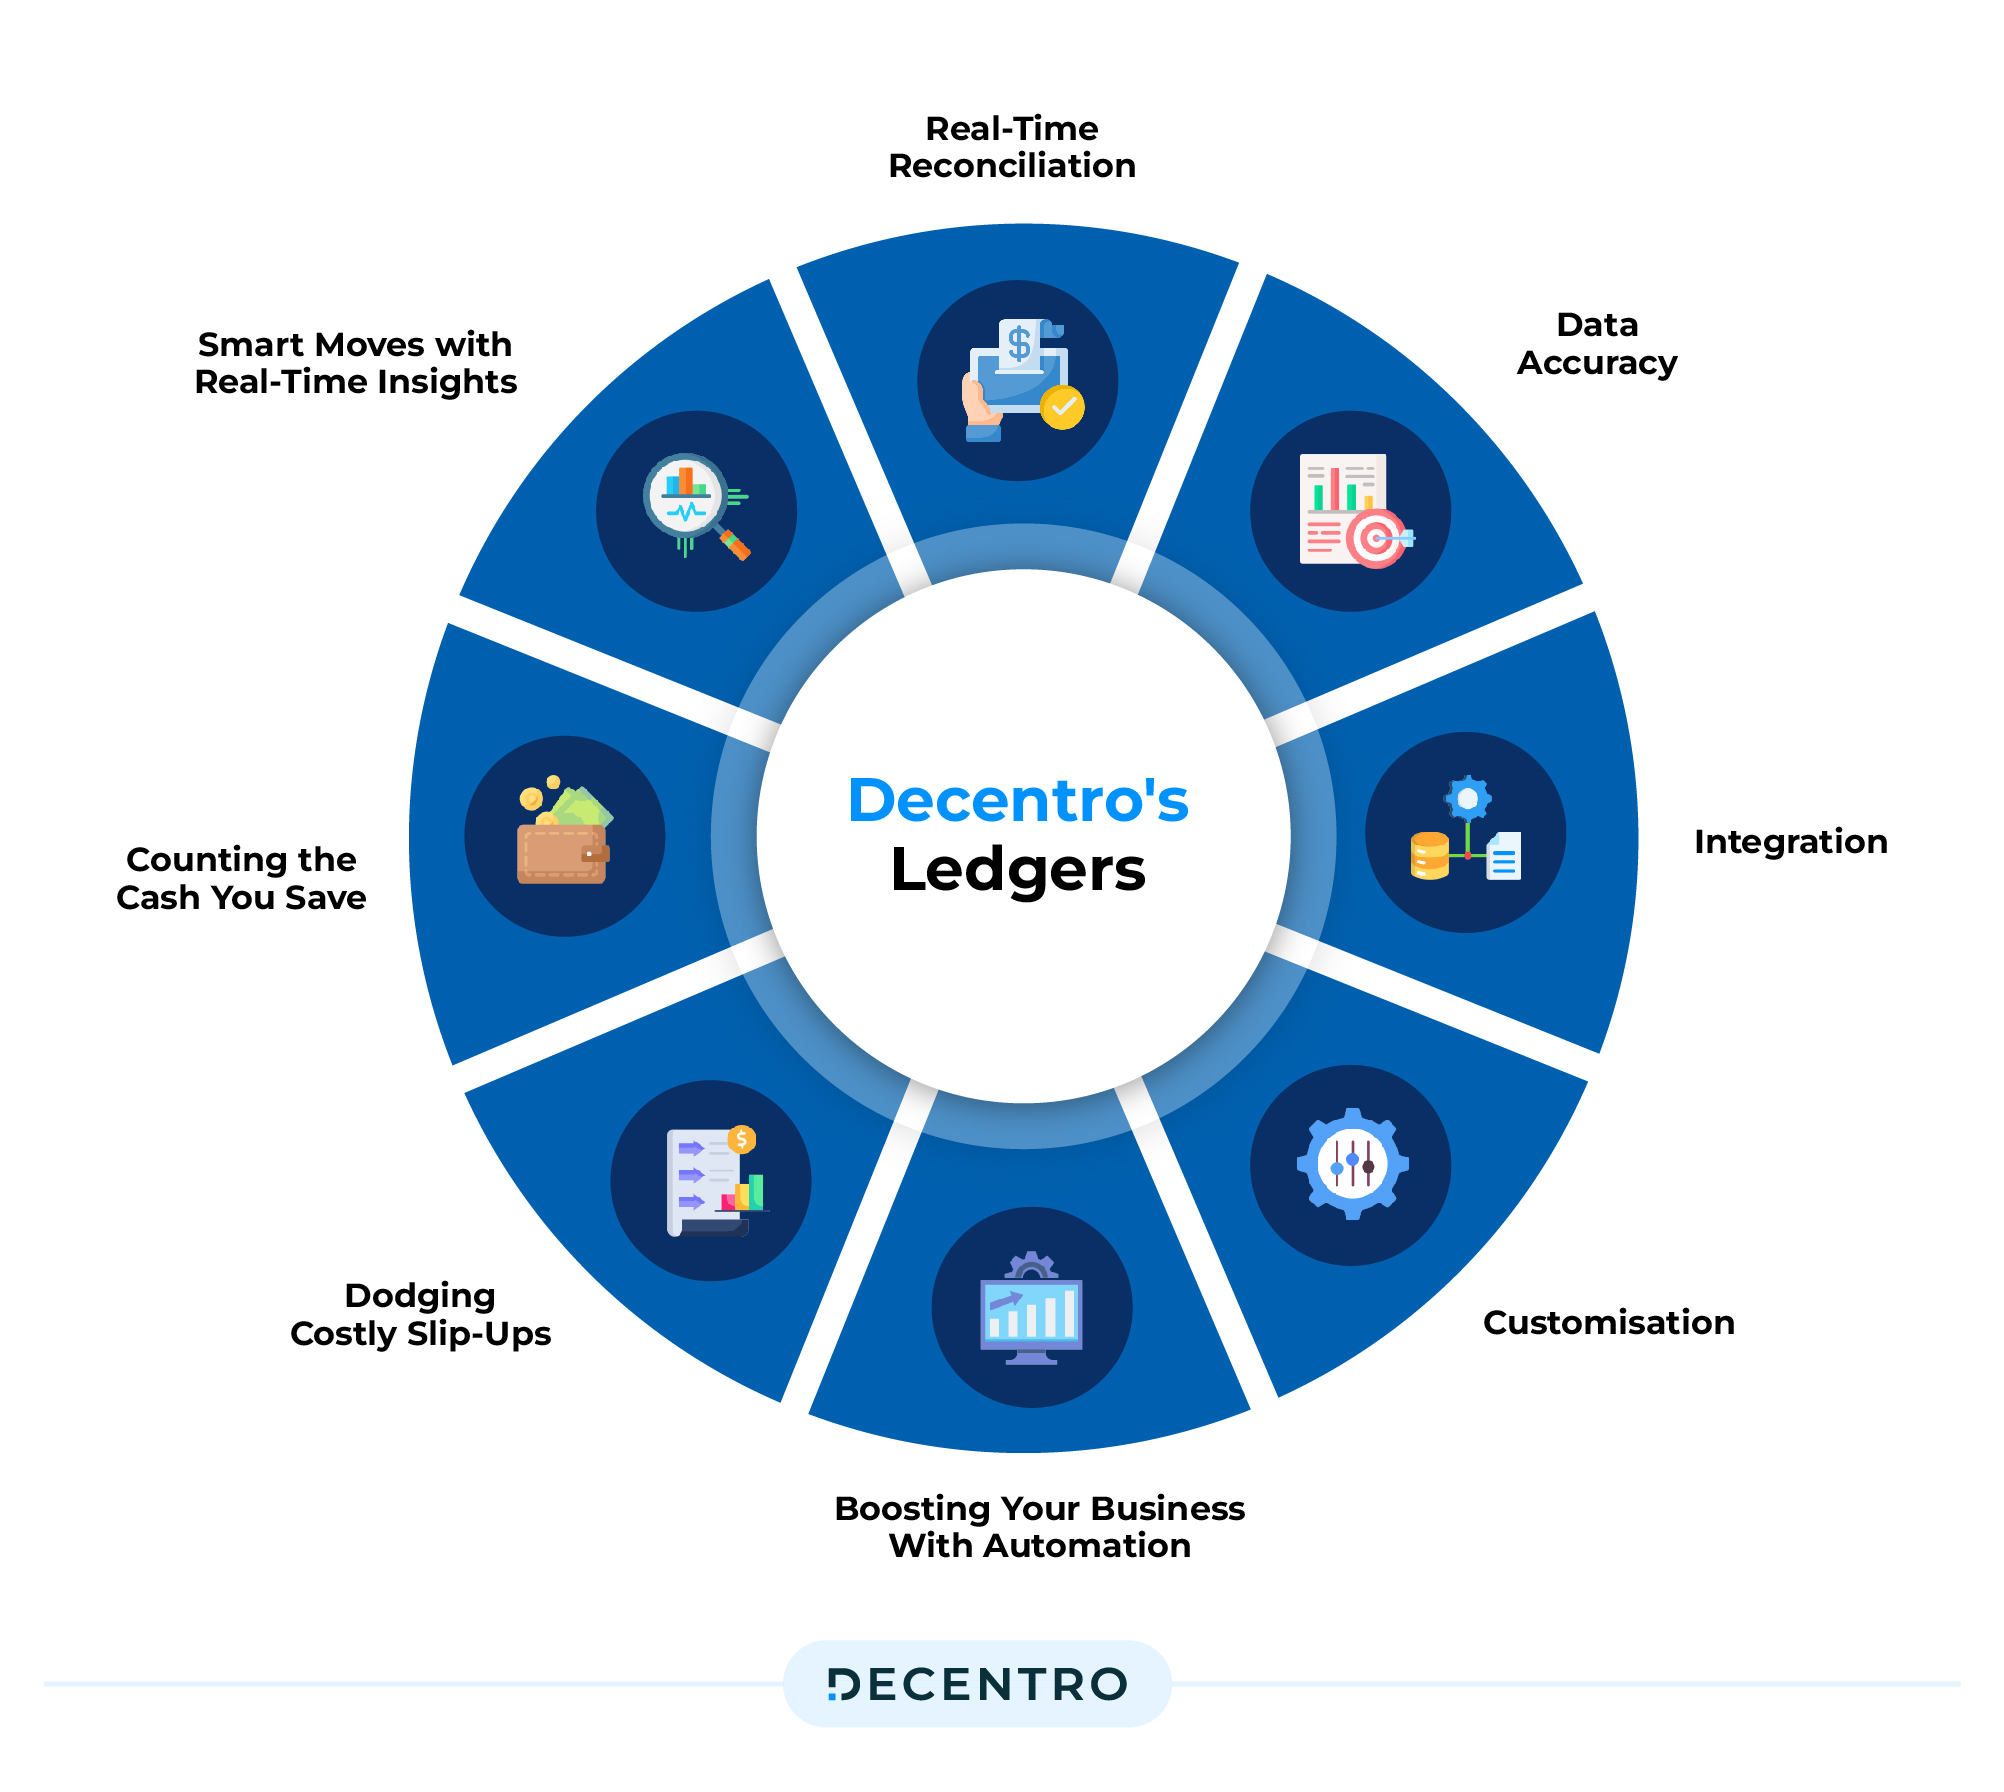 Decentros ledgers capability in payment reconciliation